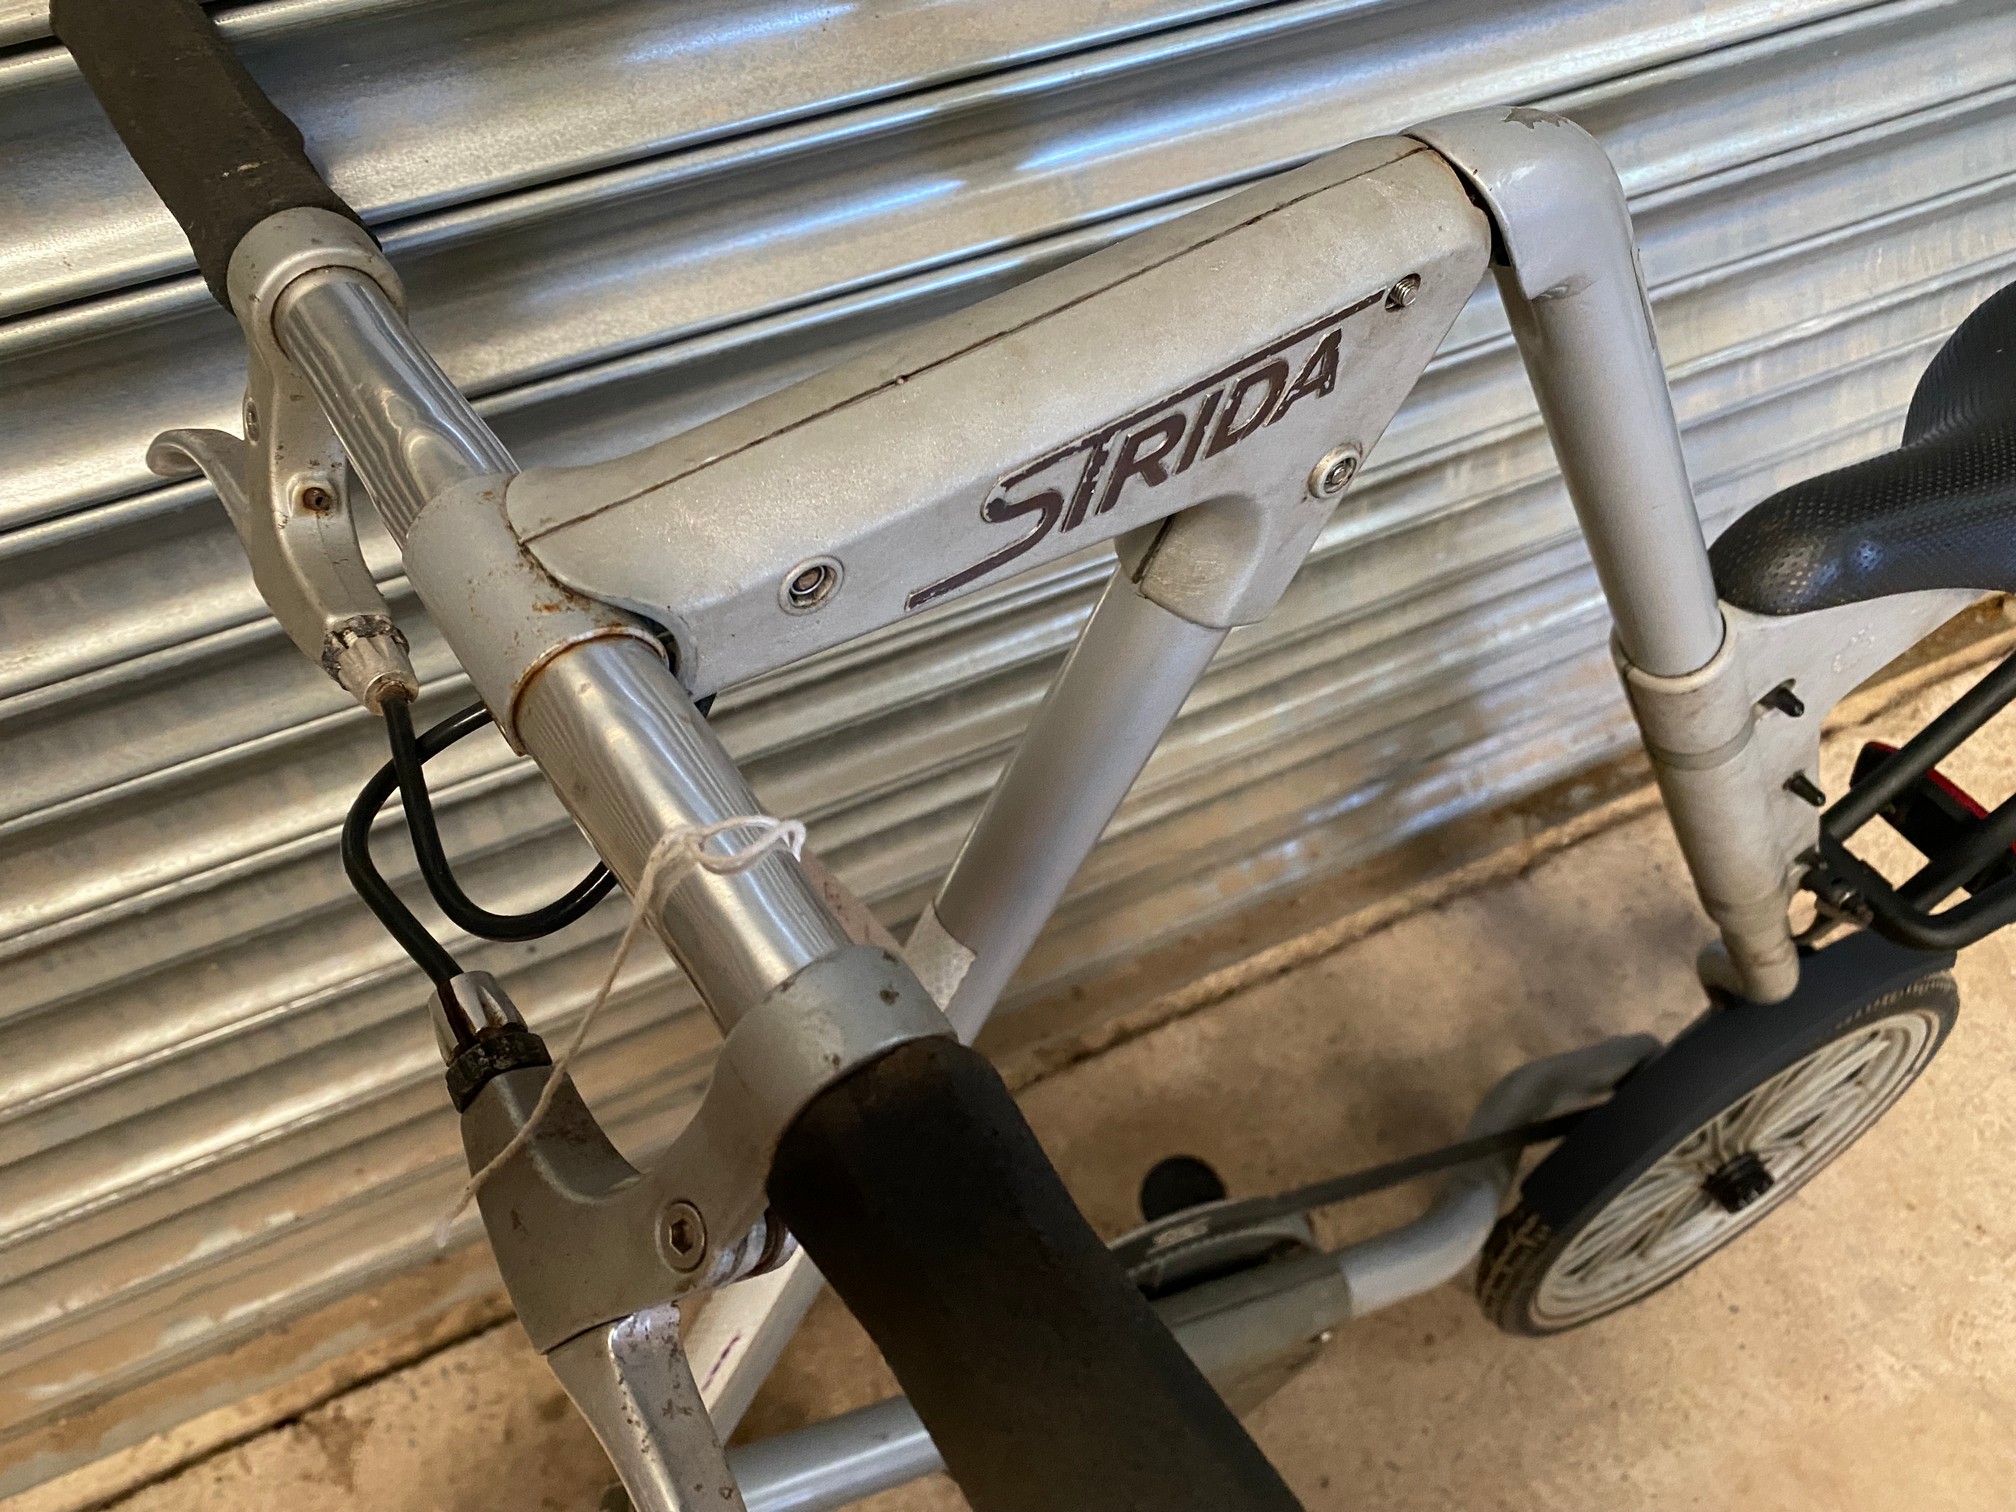 A Strida bicycle. - Image 3 of 4